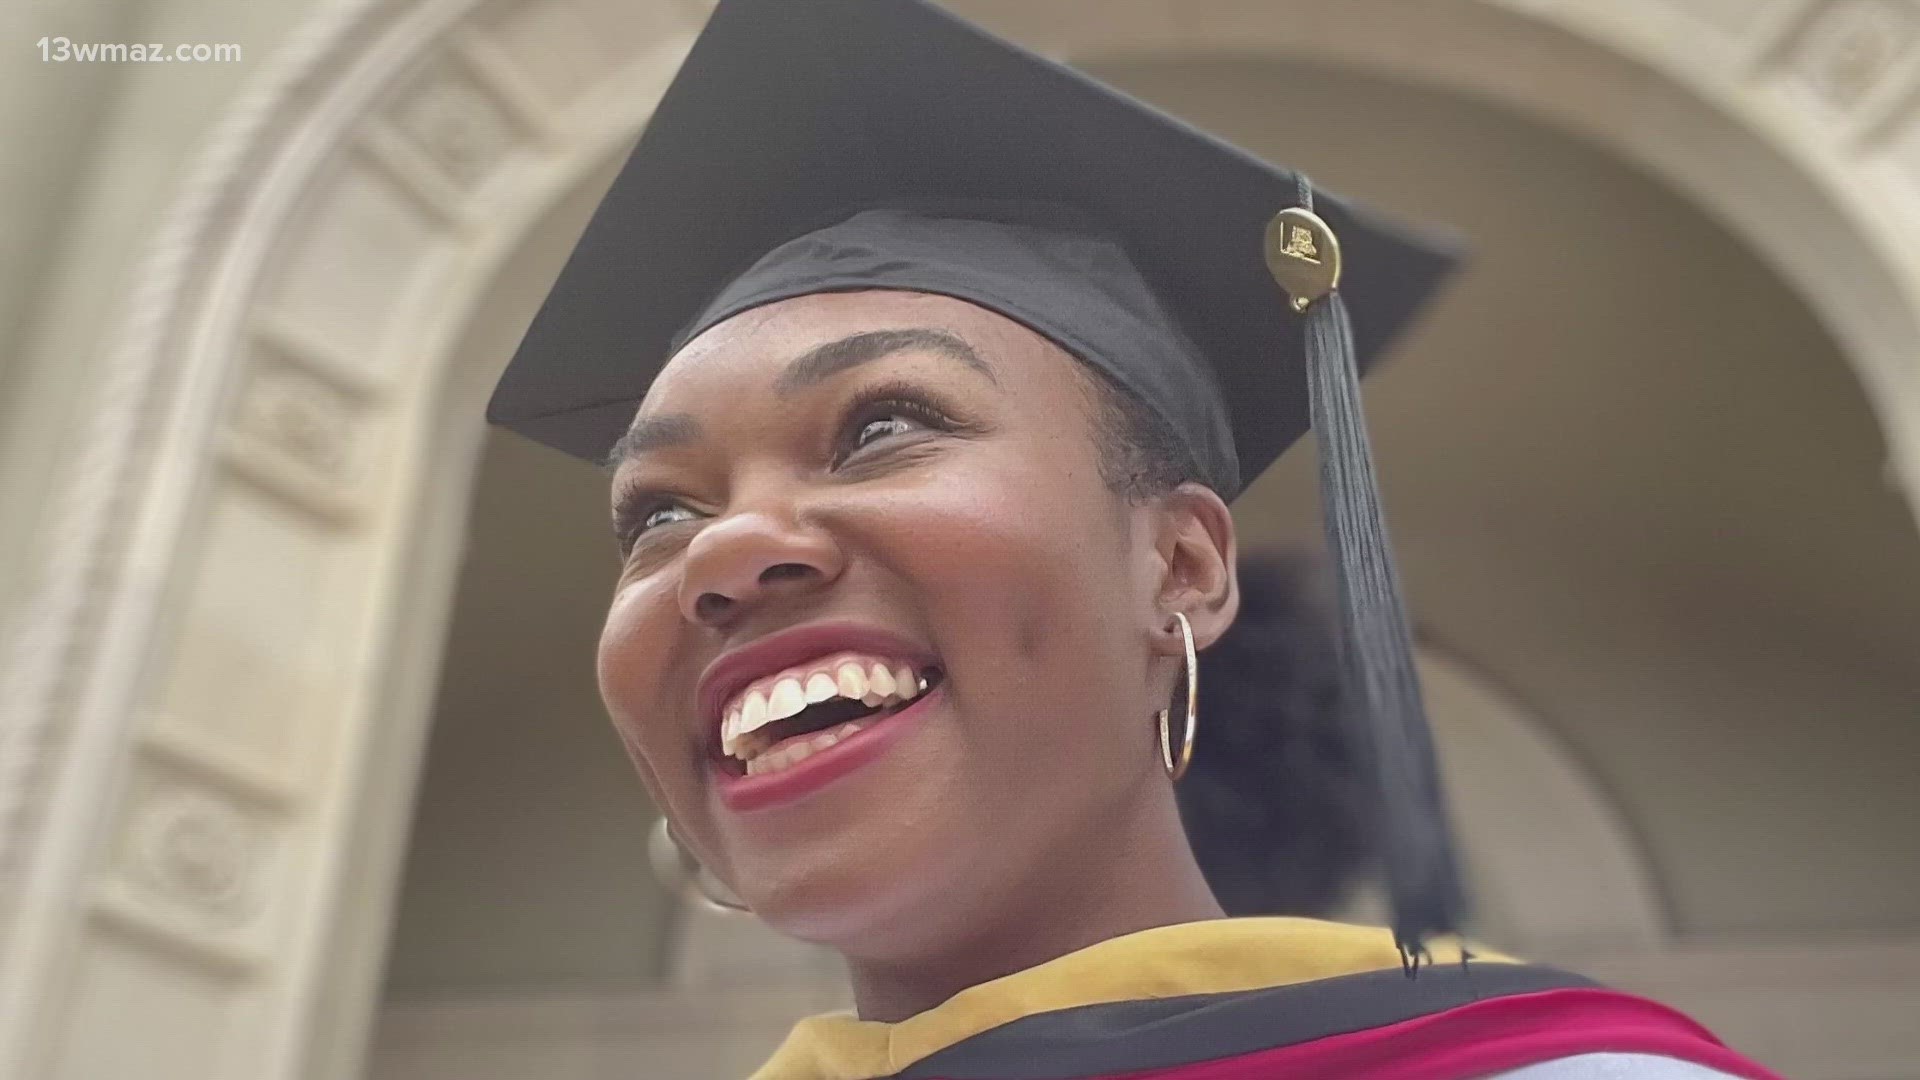 When Ariel Fortson walked on stage for her graduation this past weekend, it meant more than just a new degree.